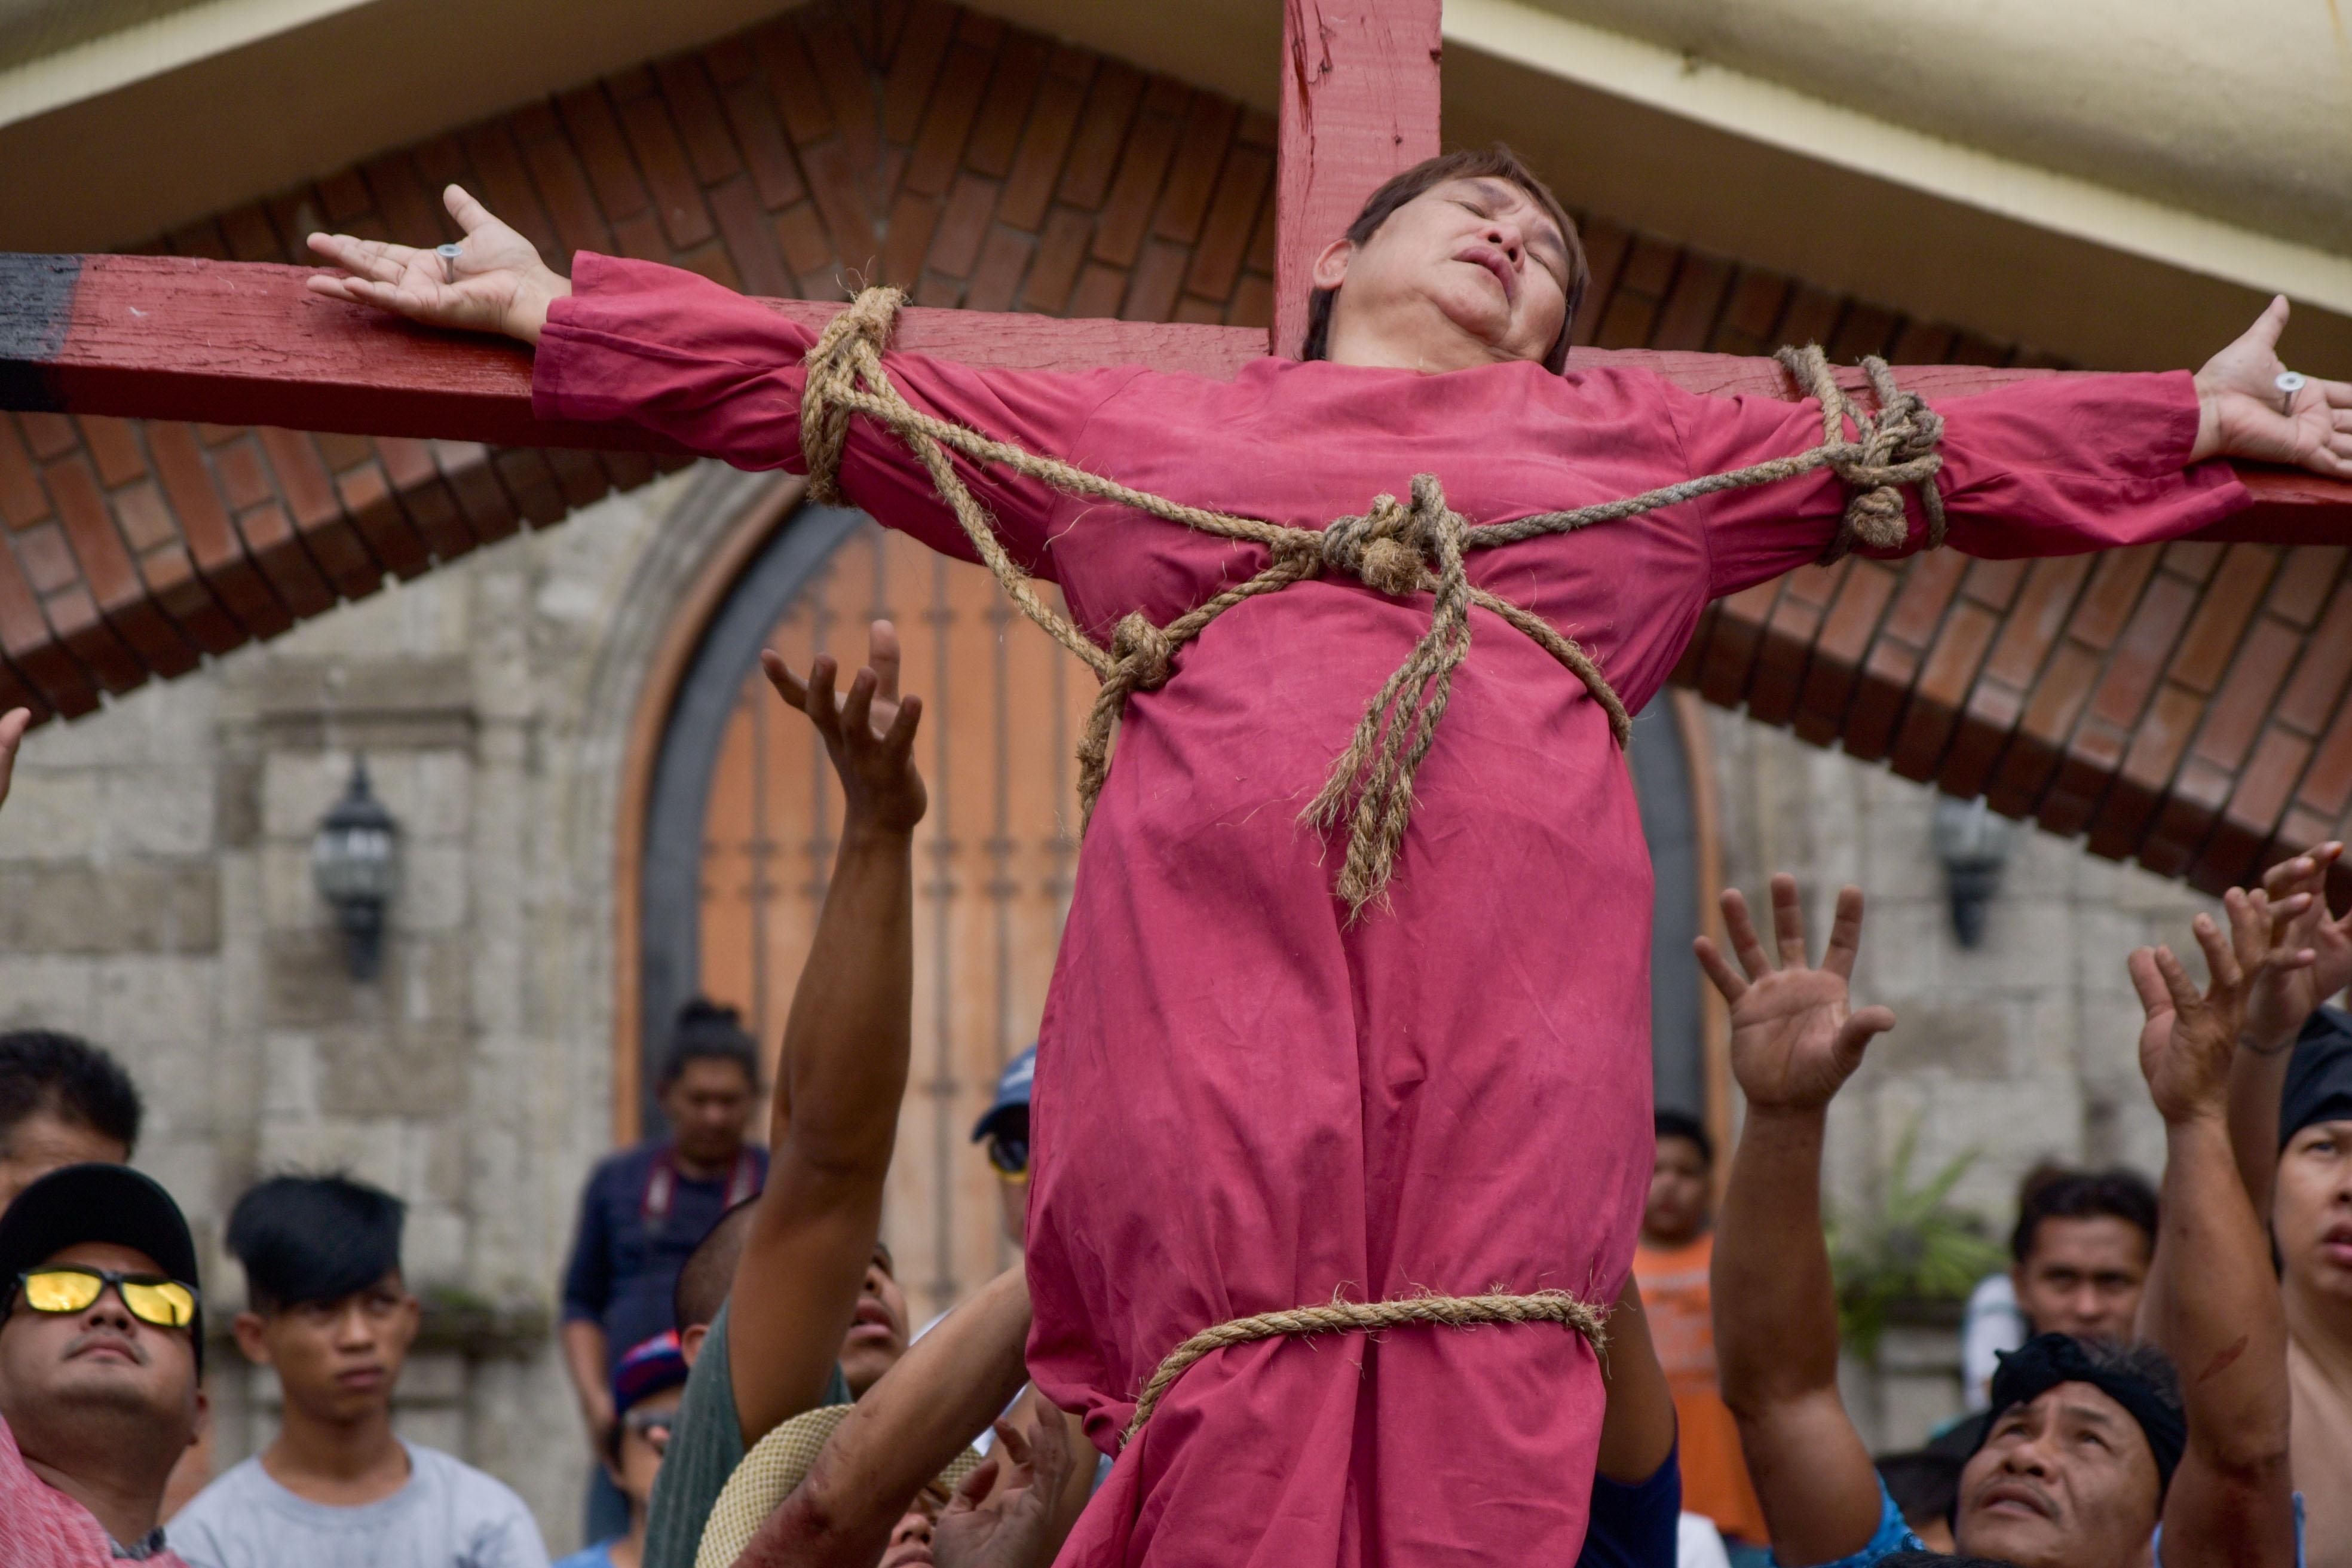 A Year Old Woman Collapses After Prayerful Crucifixion Gma News Online